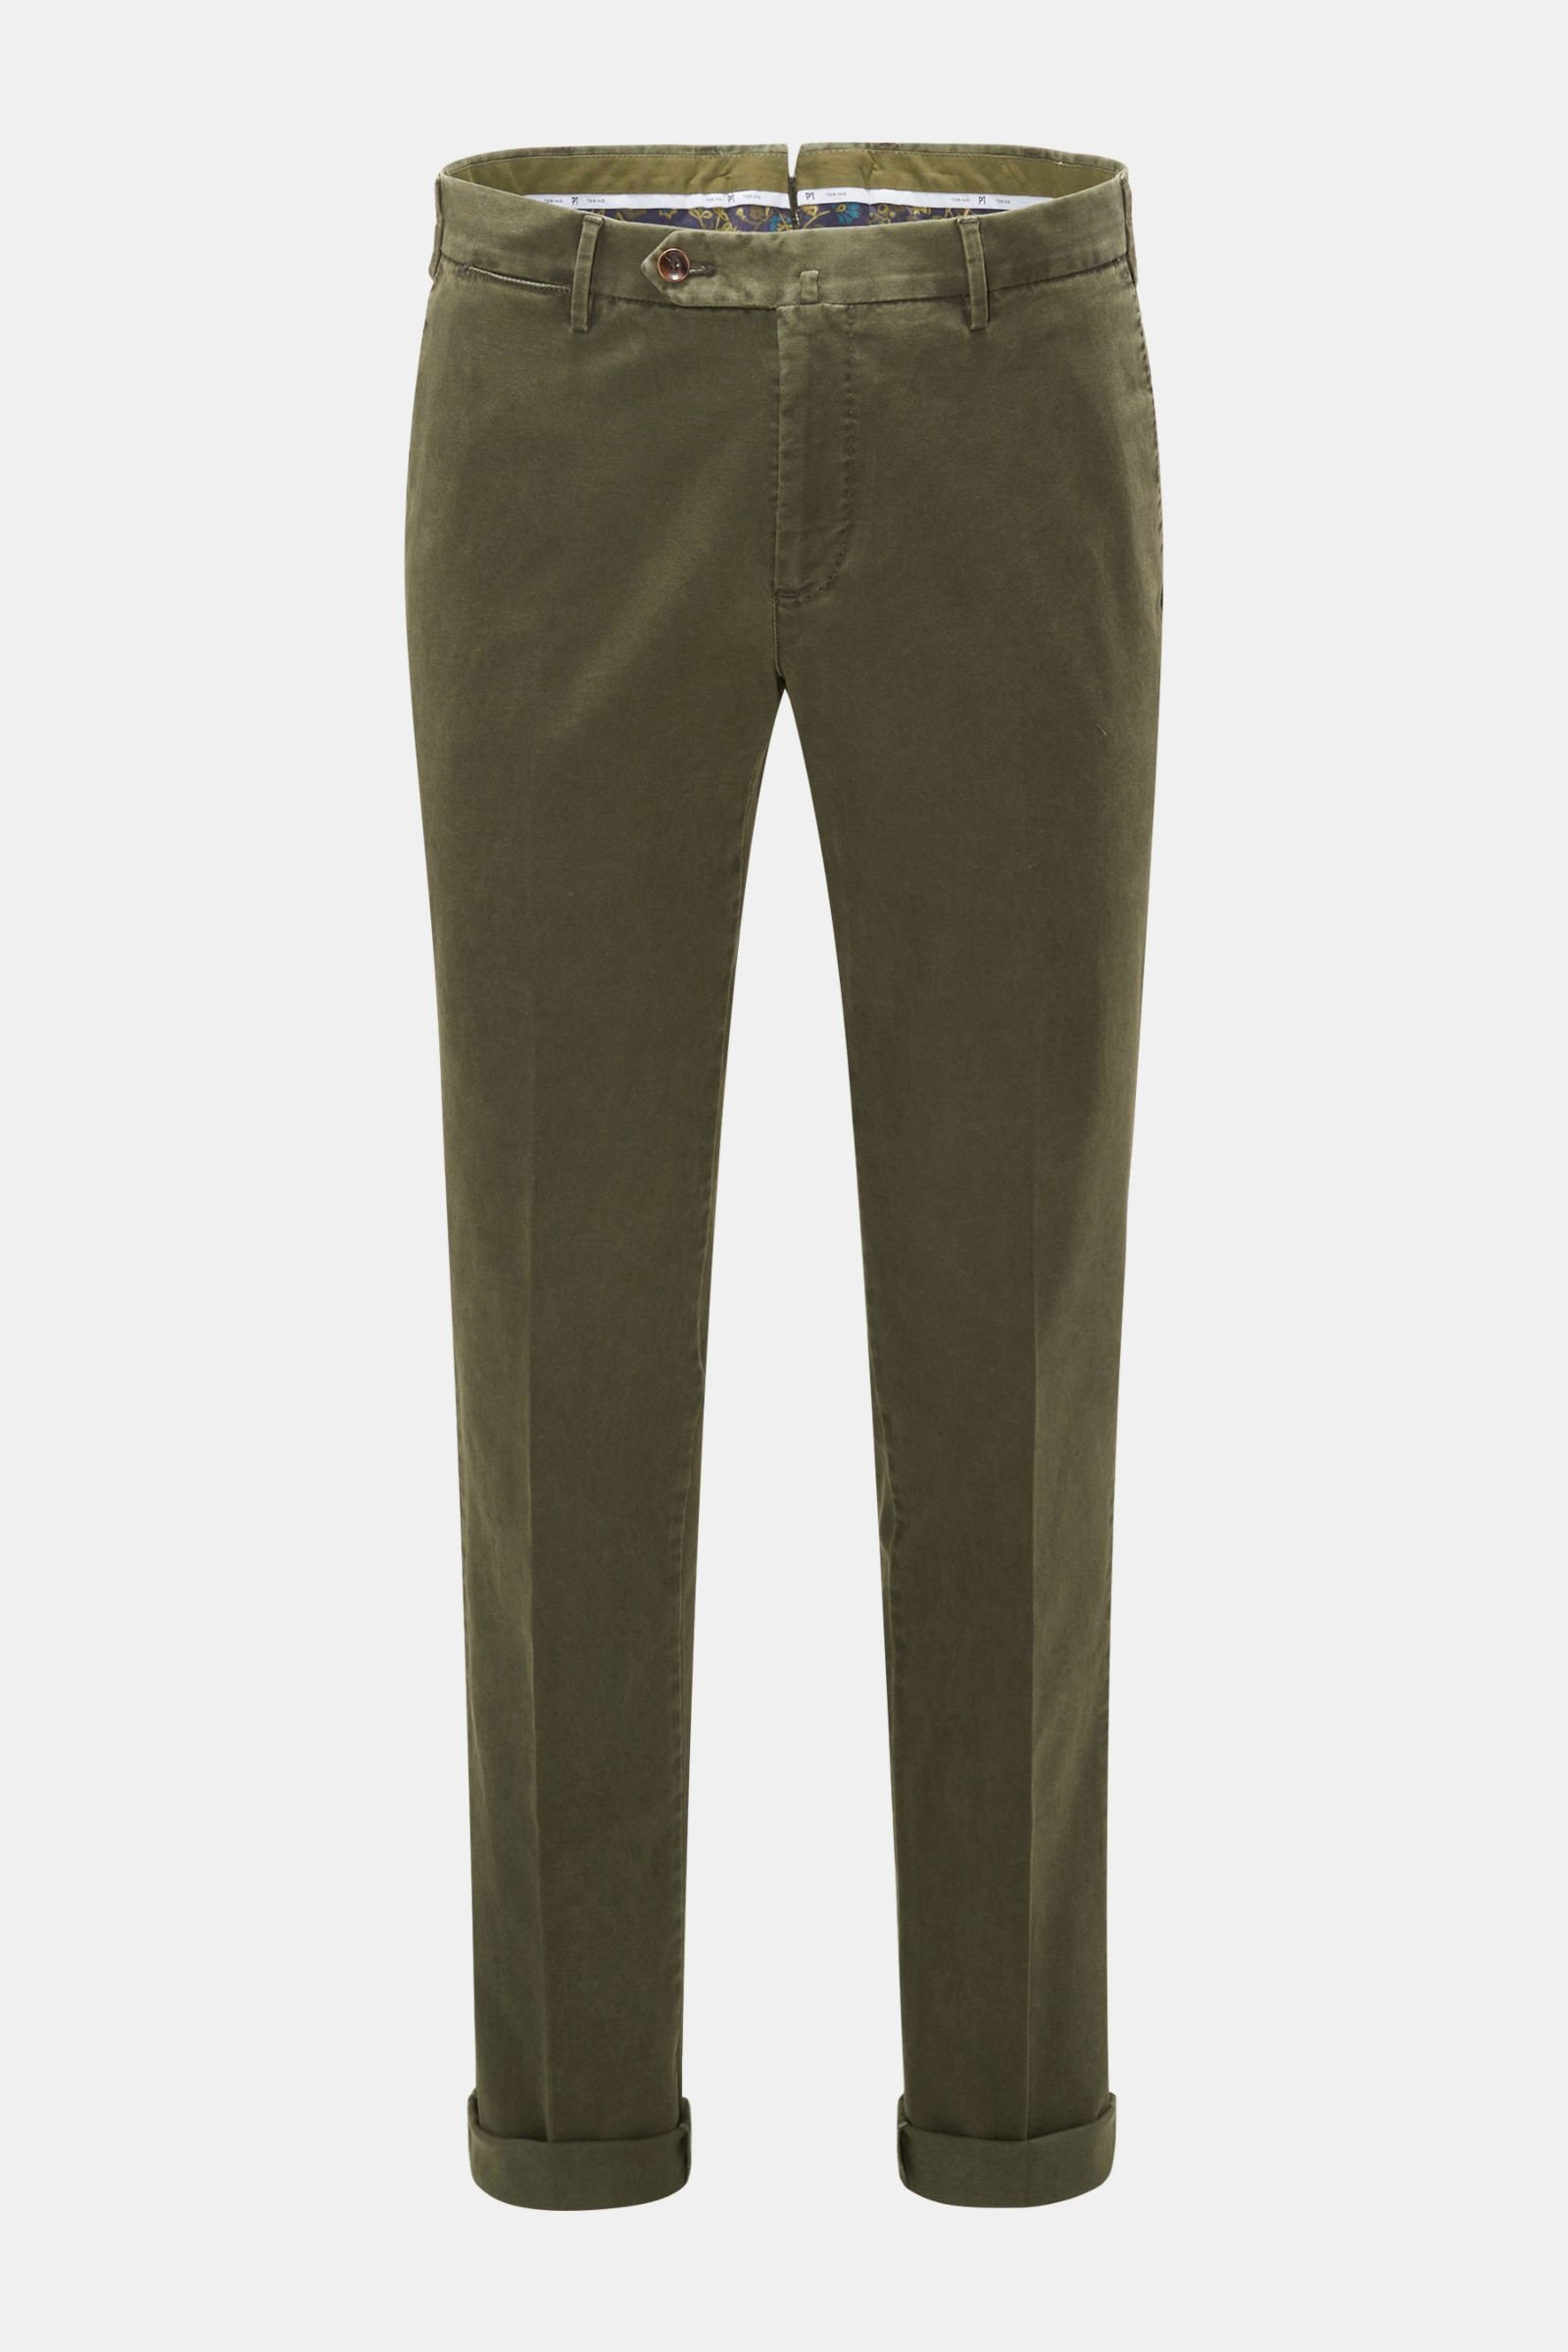 Cotton trousers 'Slim Fit' olive